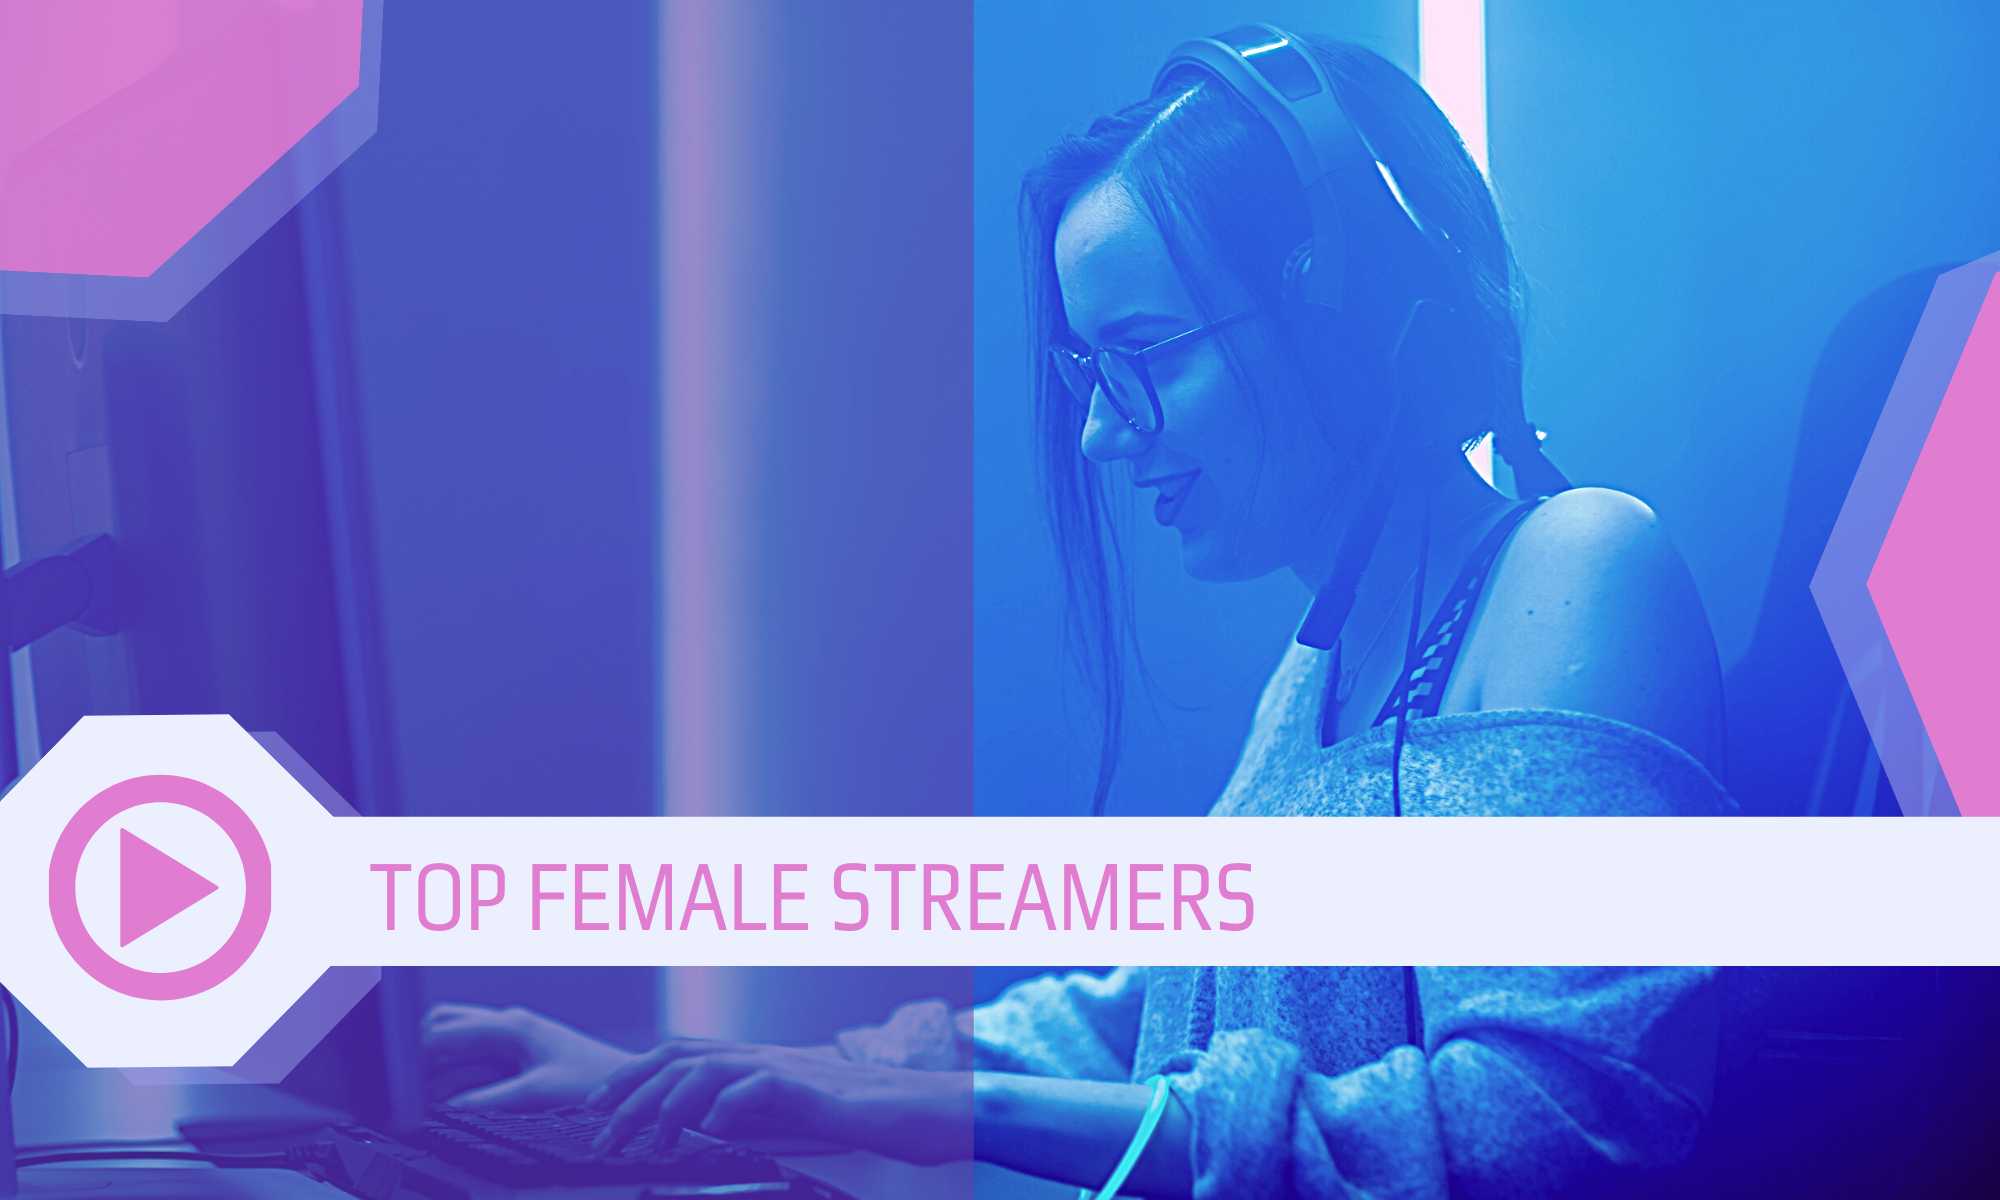 Check out the Top 3 Female Twitch Streamers as of December